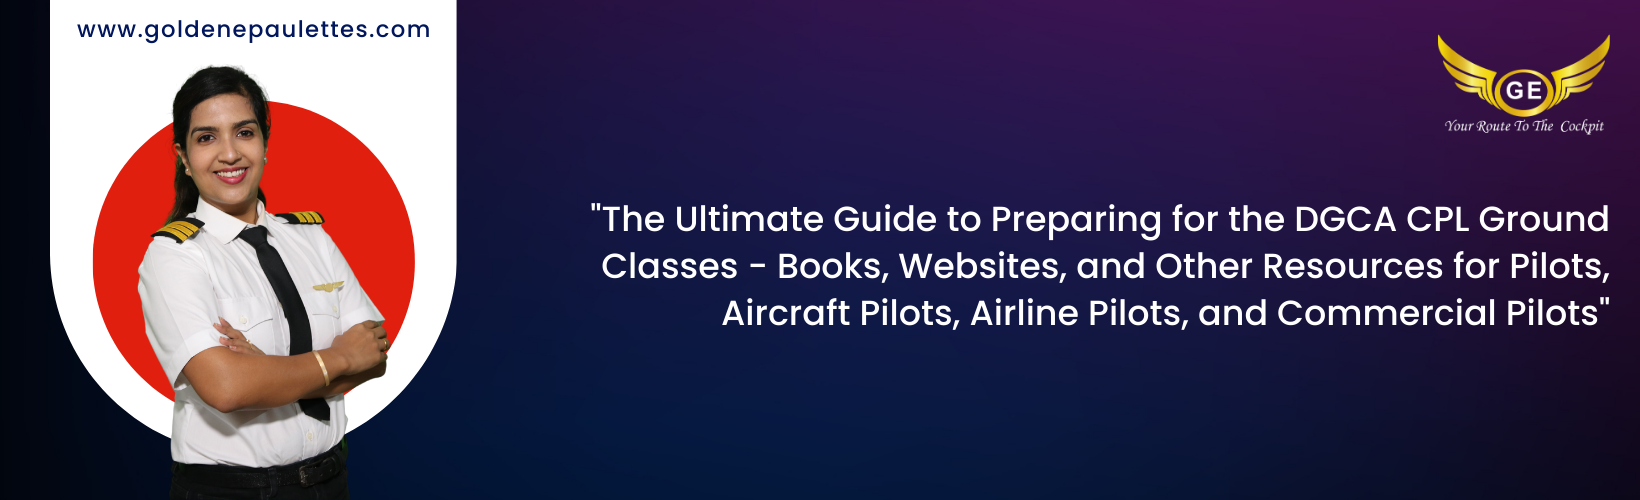 An Overview of the Subjects Covered in the DGCA CPL Ground Classes